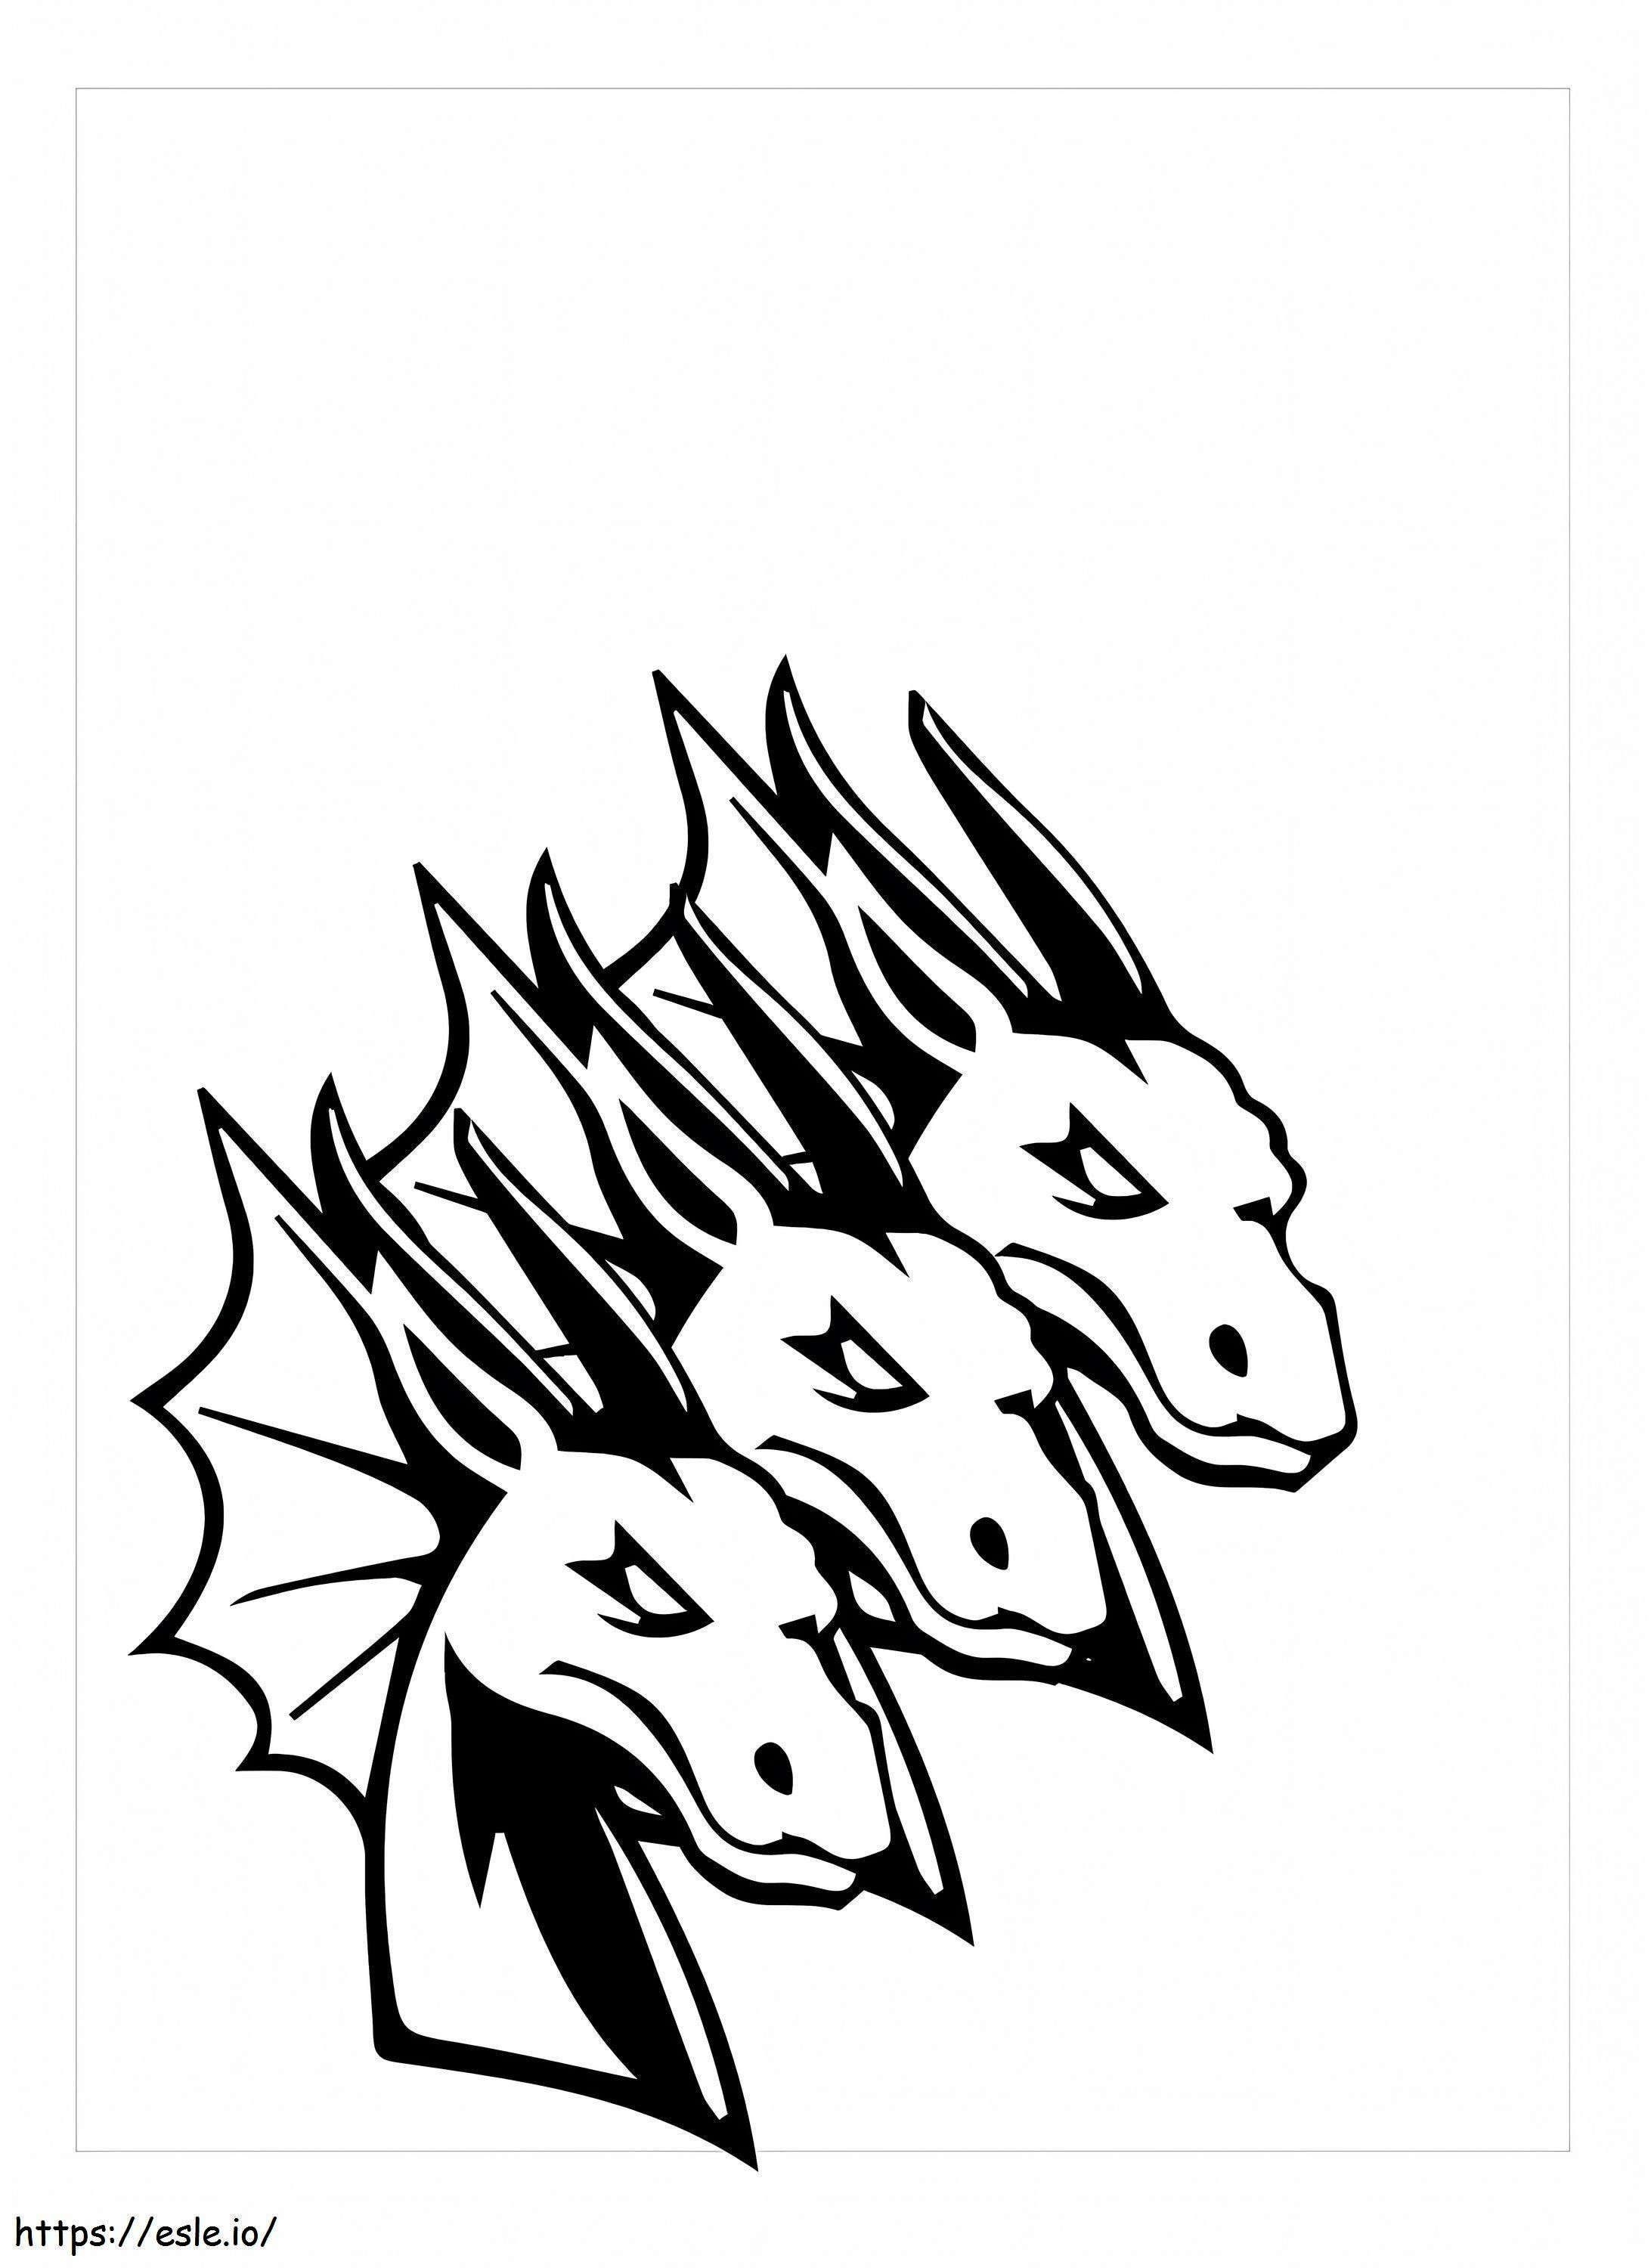 Good Hydra coloring page